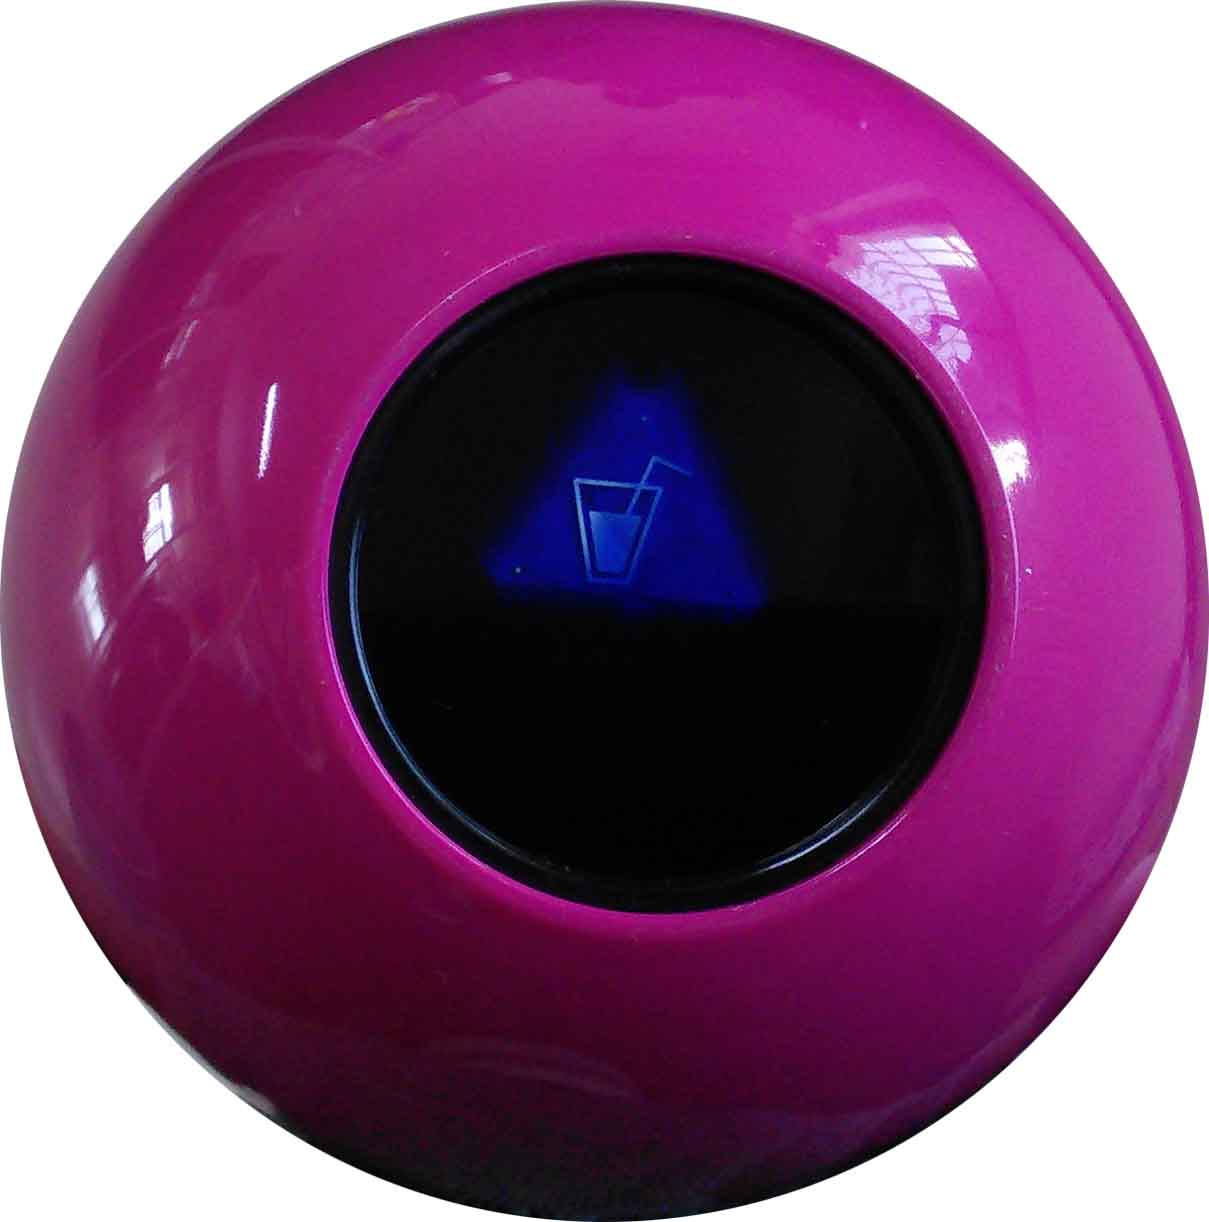 Custom magic 8 ball with Image answers about tumbler shape